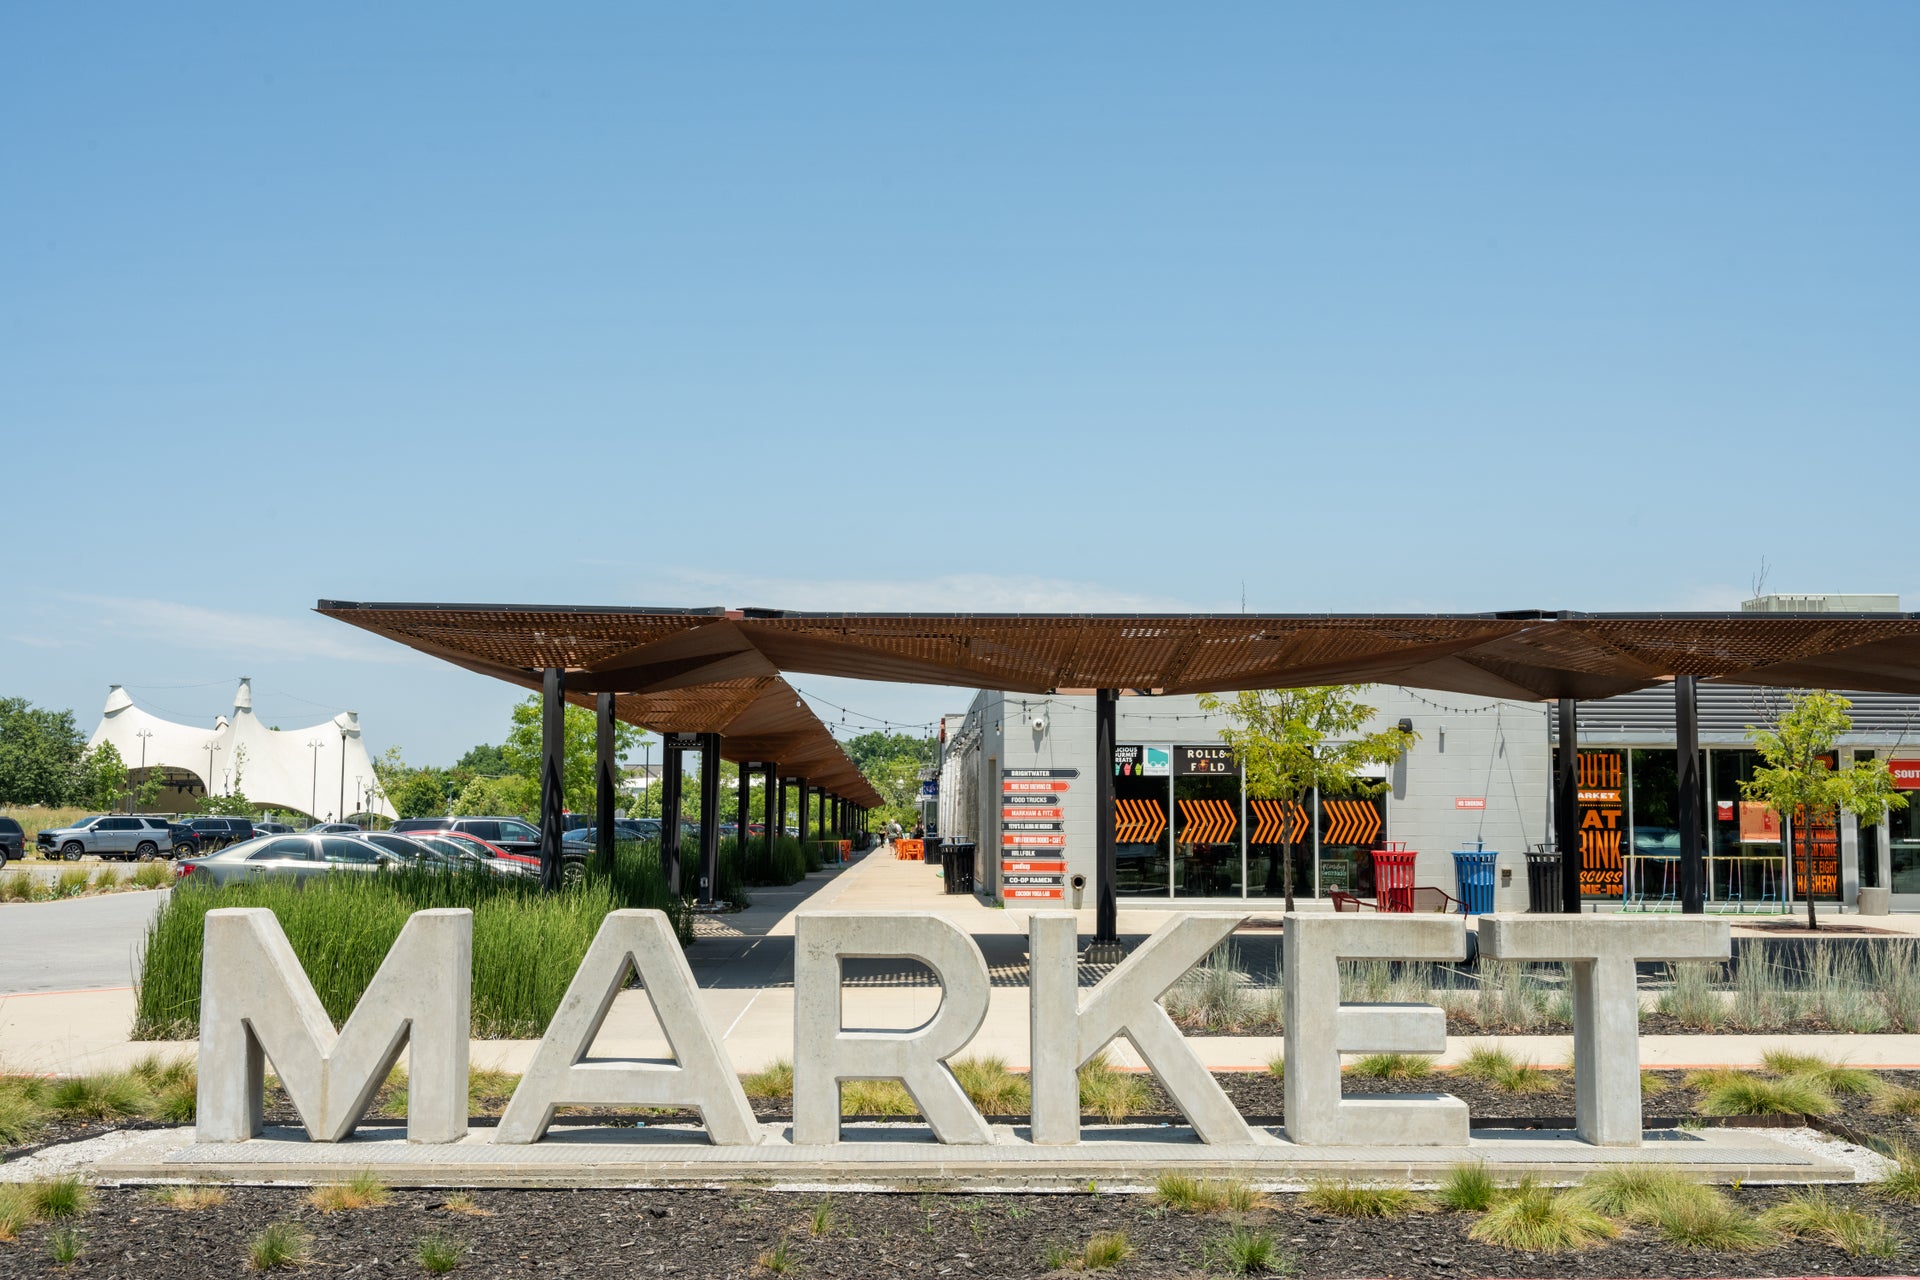 8th Street Market a local favorite for dining and hangouts